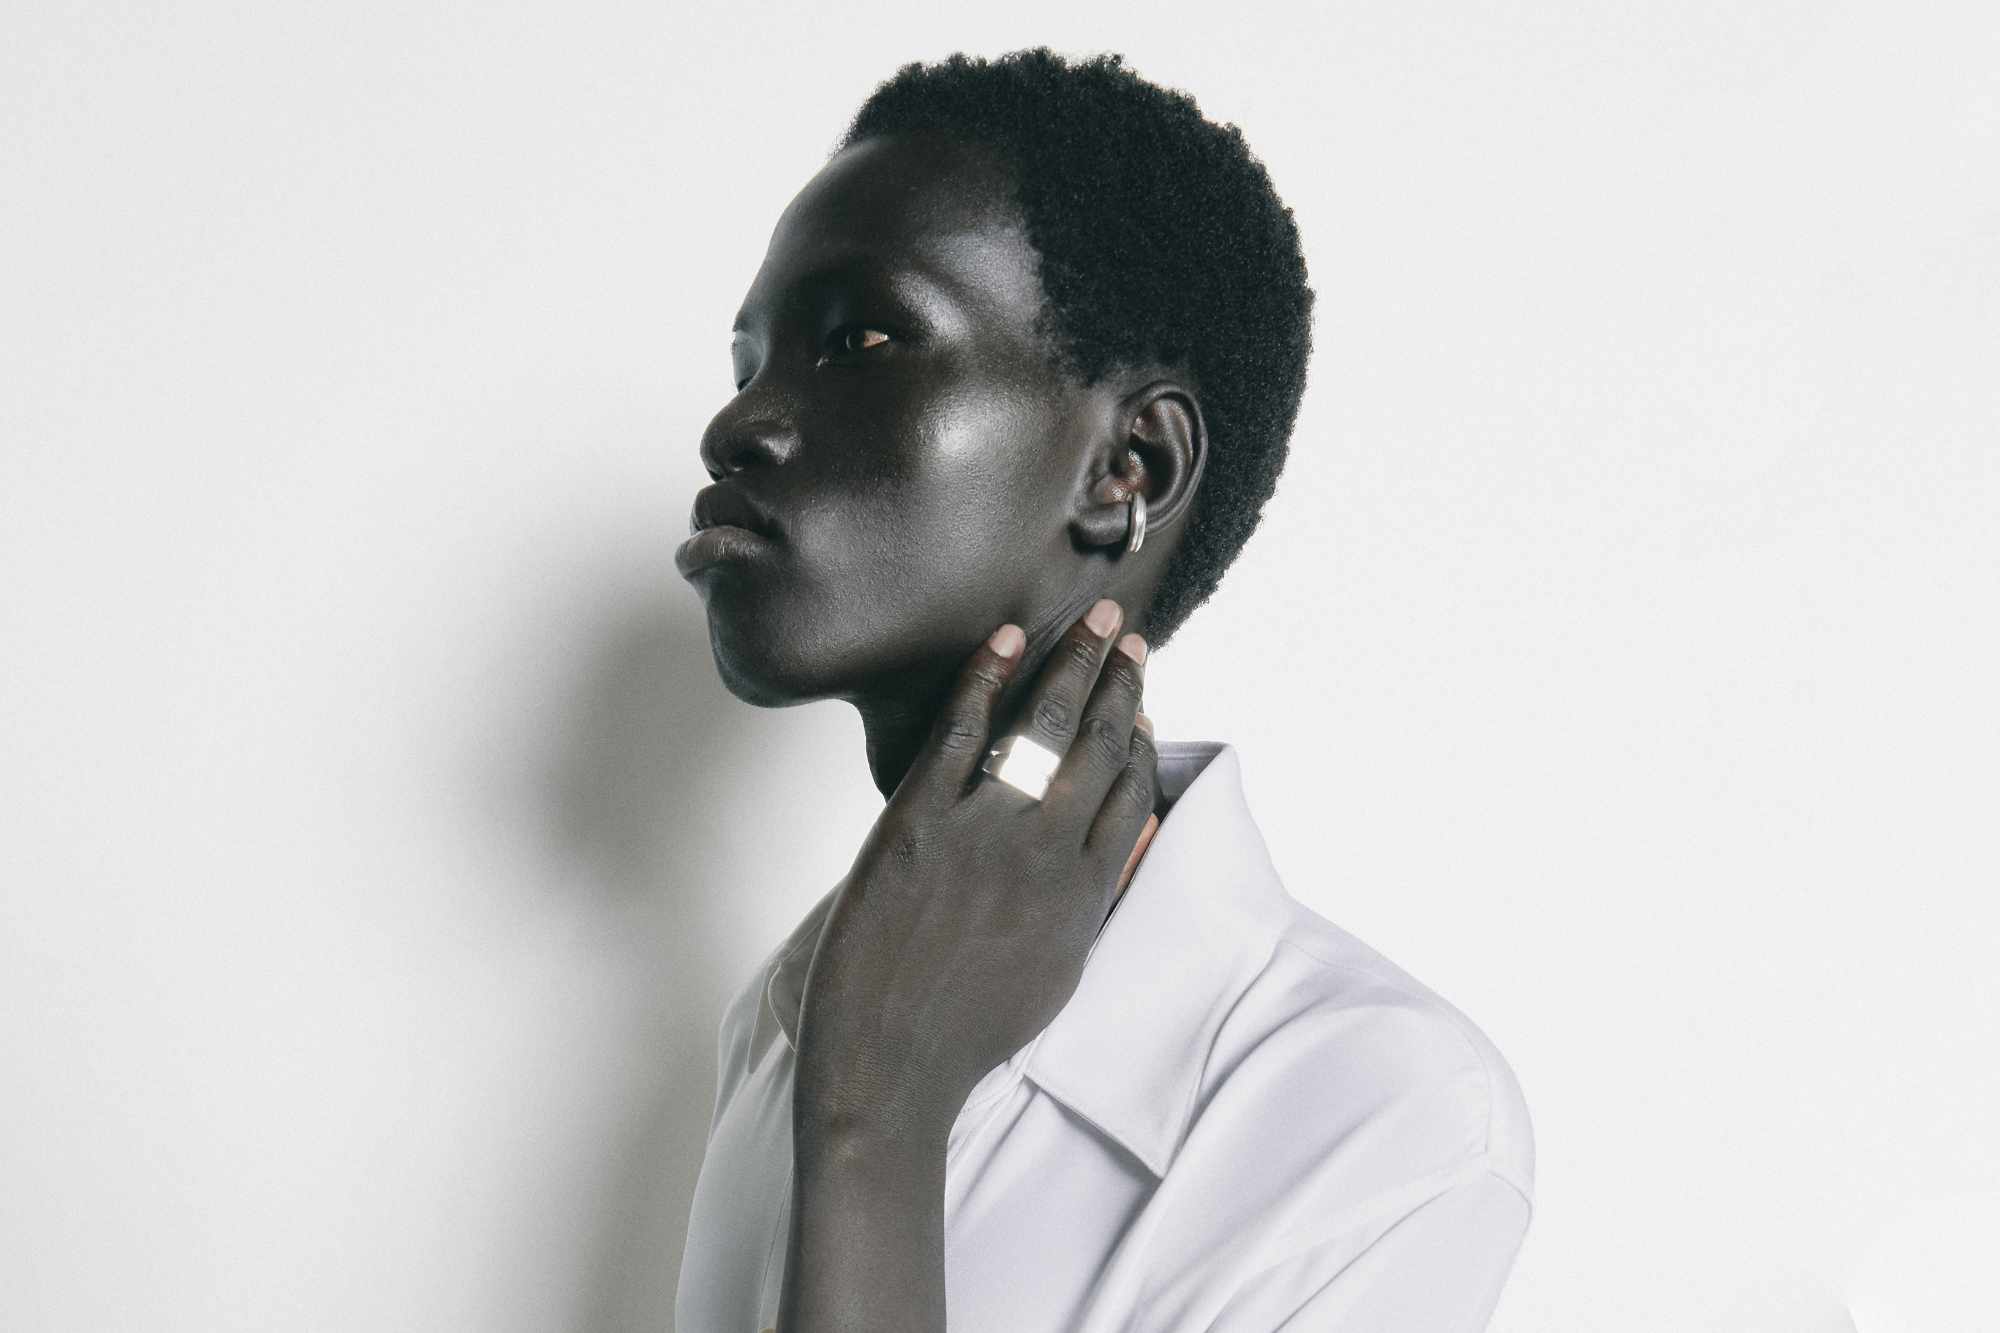 Peter Do & All Blues' collaborative jewelry collection